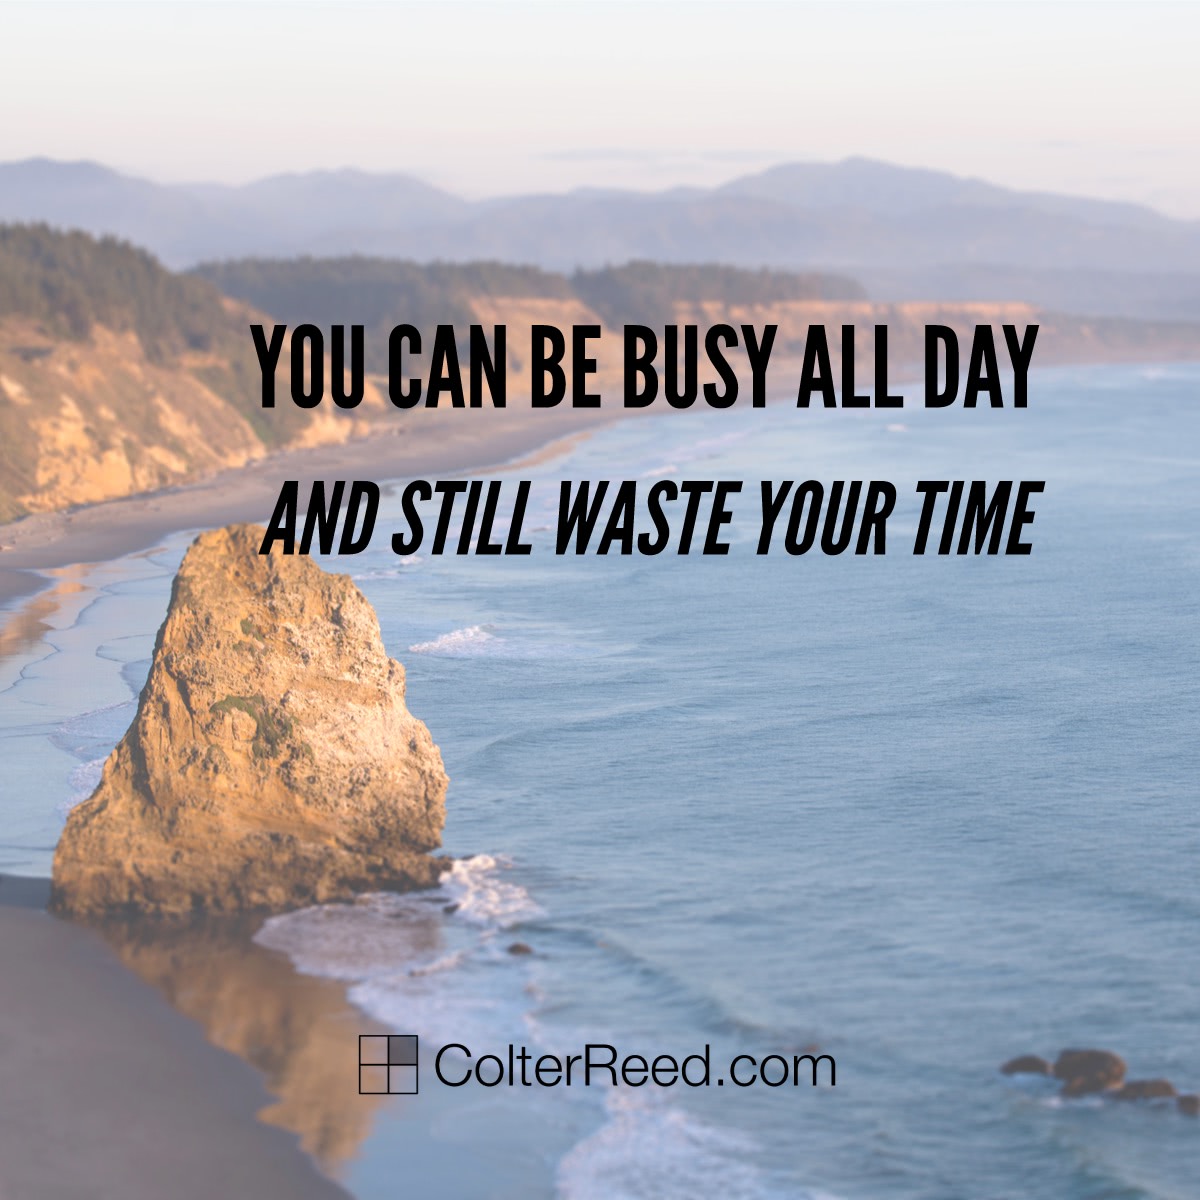 You can be busy all day and still waste your time. —Colter Reed